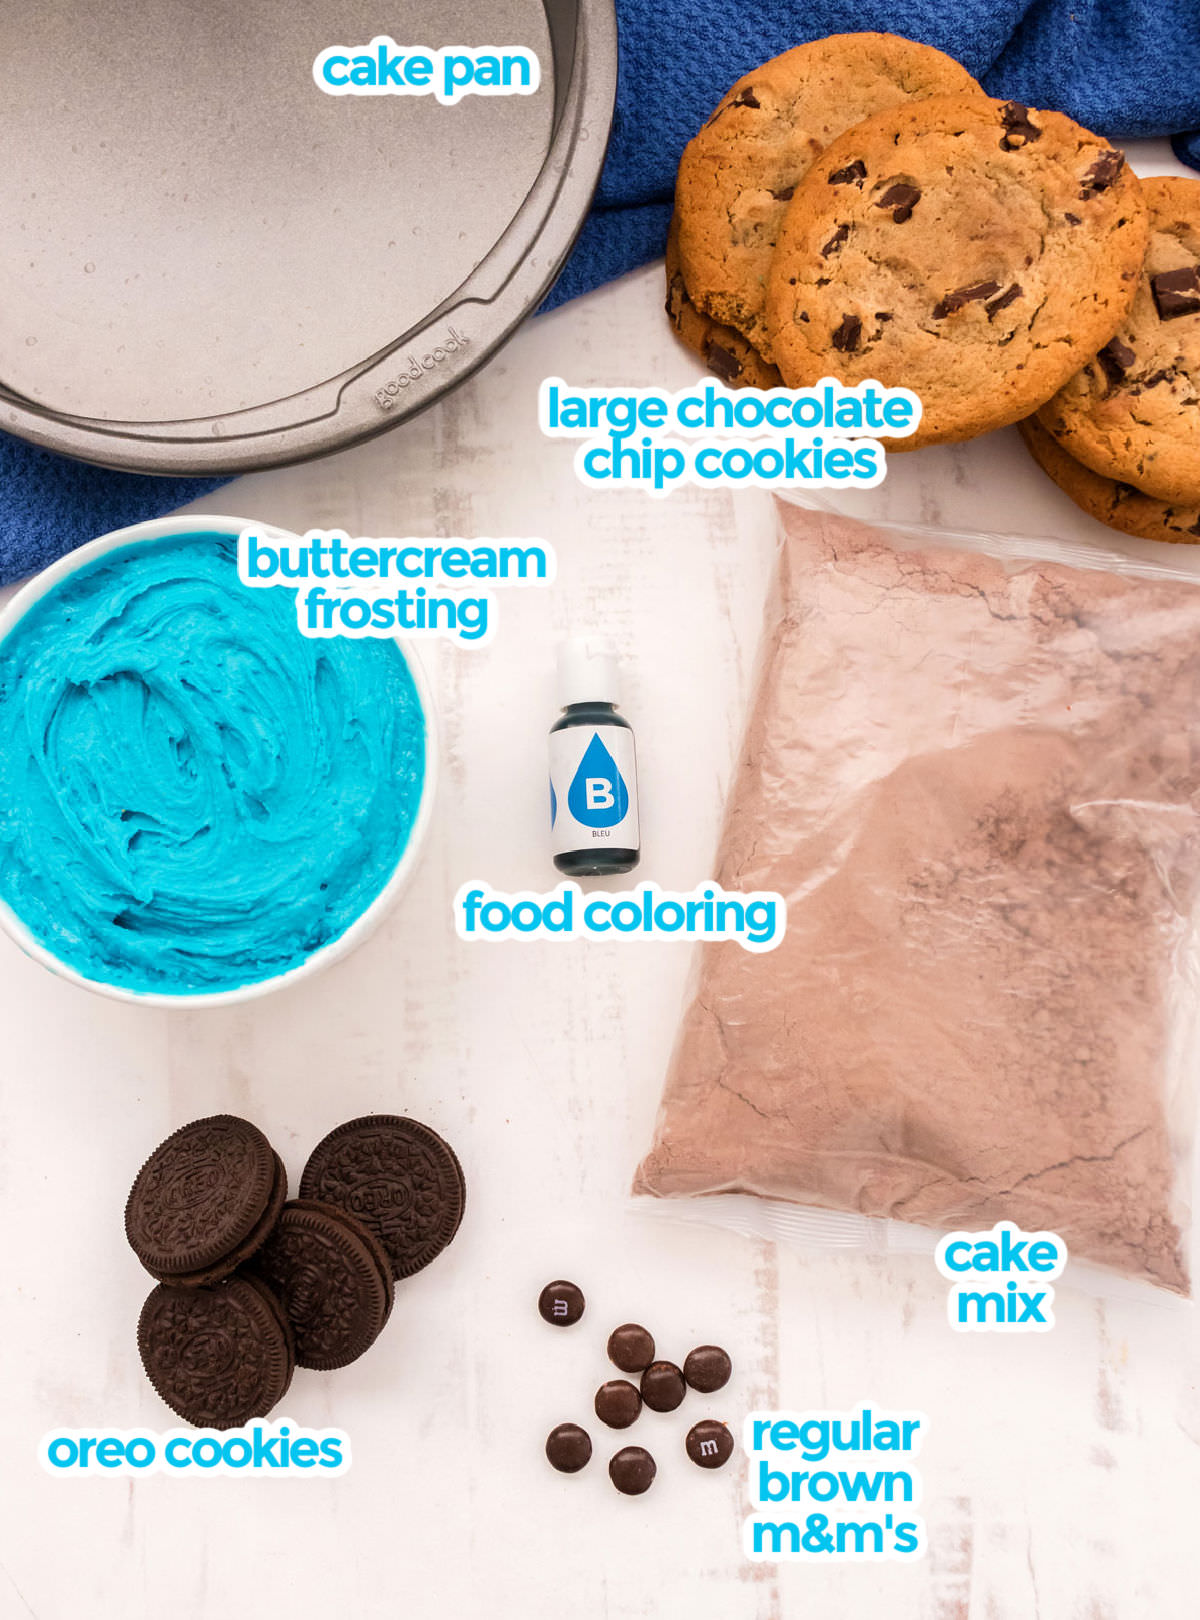 All the ingredients you will need to make a Cookie Monster Cake including cake pan, cake mix, buttercream frosting, blue food coloring, jumbo chocolate chip cookies, Oreo cookies and brown M&M's.